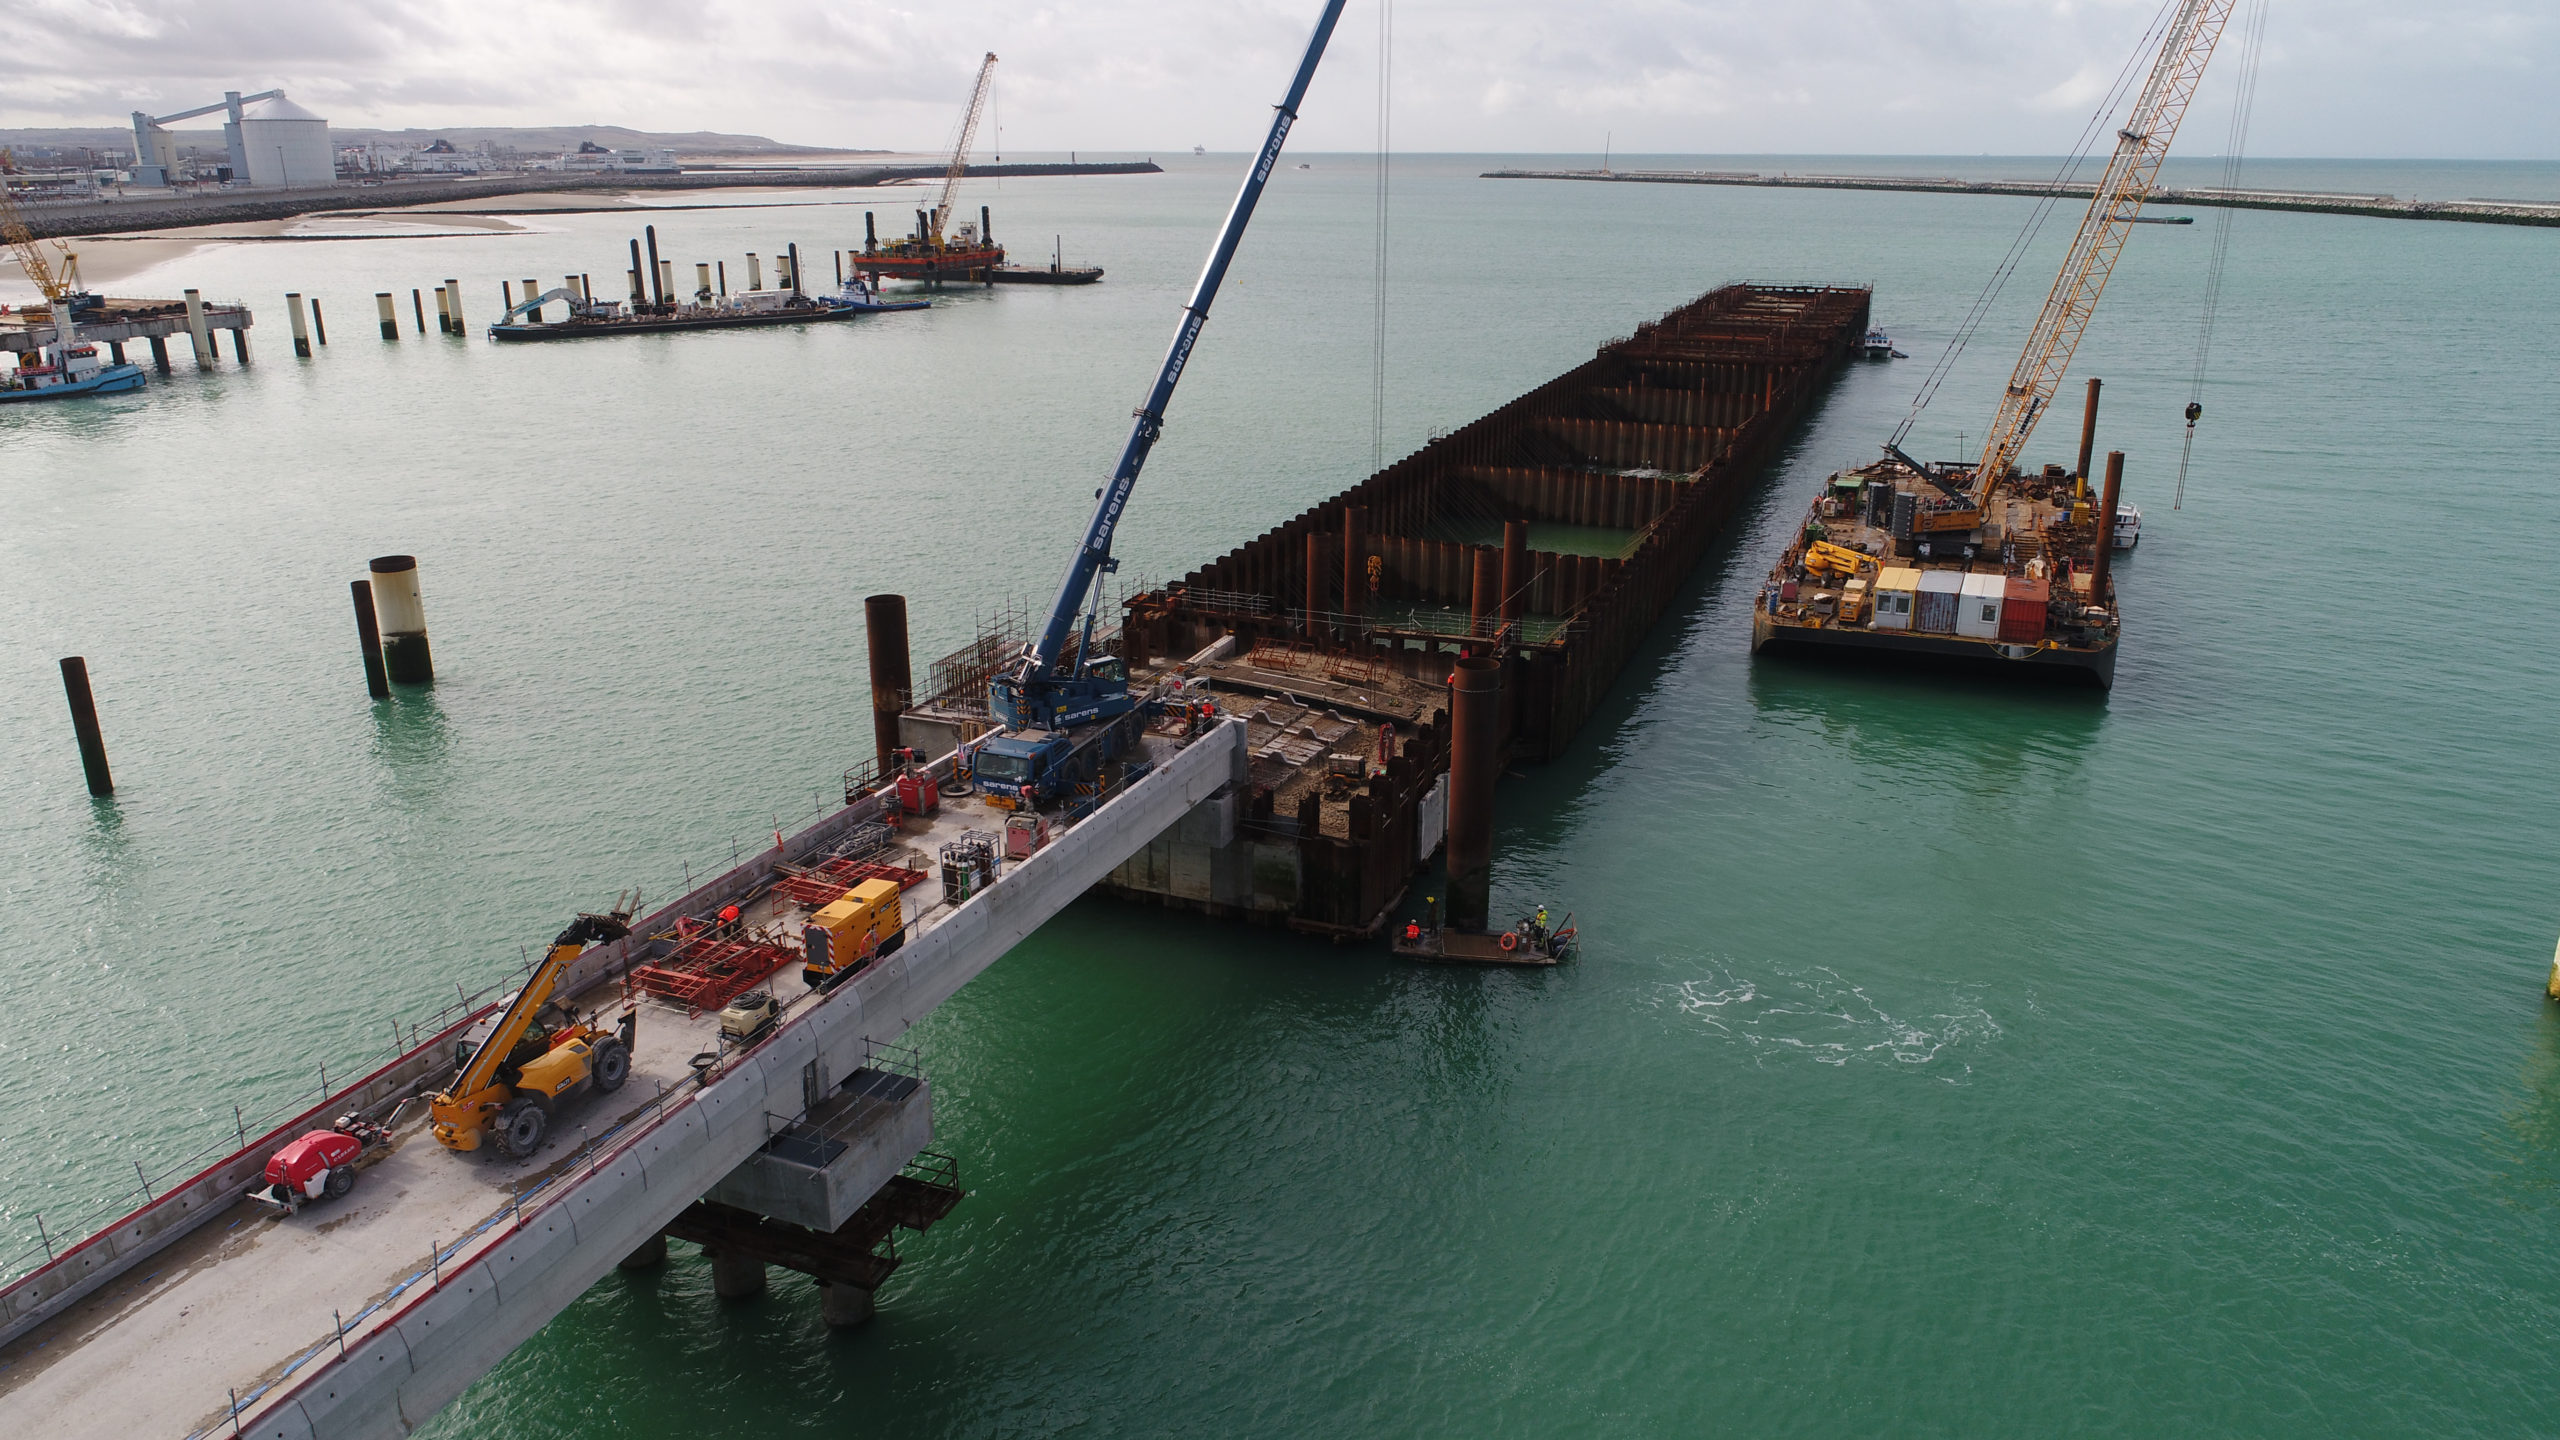 Neptune Marine charter equipment used to extend Port of Calais